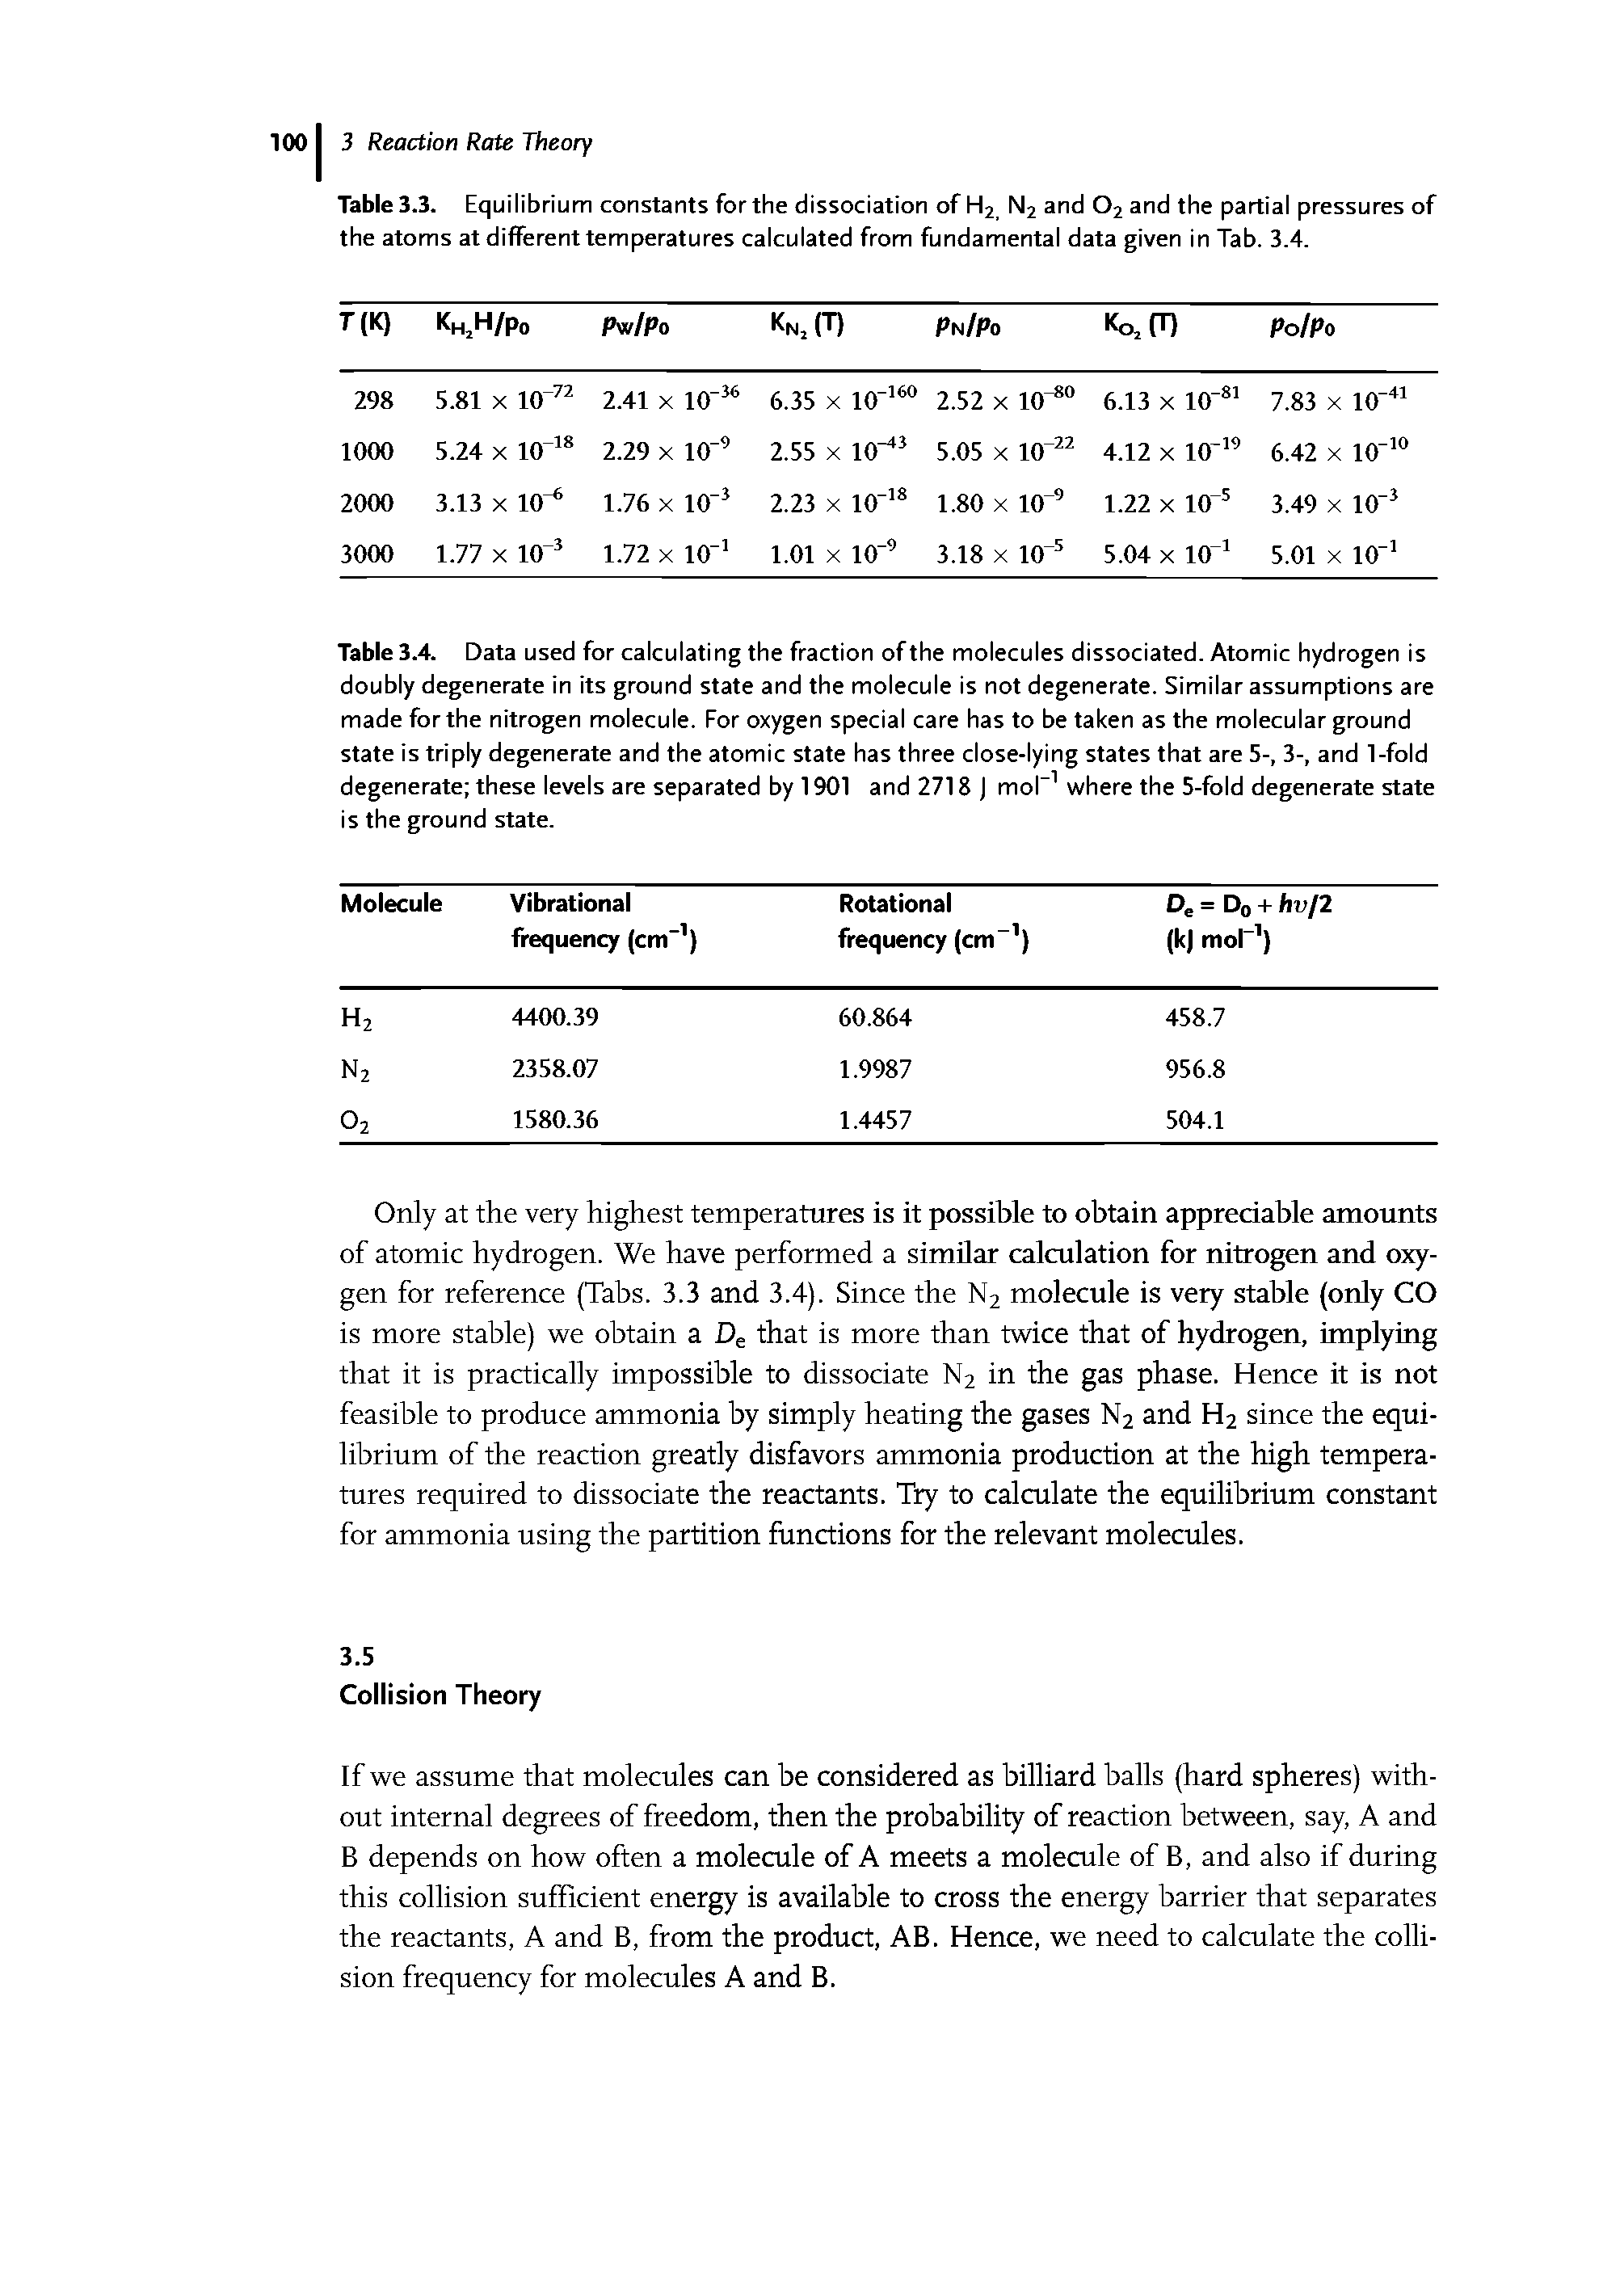 Table 3.3. Equilibrium constants for the dissociation of H2, N2 and O2 and the partial pressures of the atoms at different temperatures calculated from fundamental data given in Tab. 3.4.